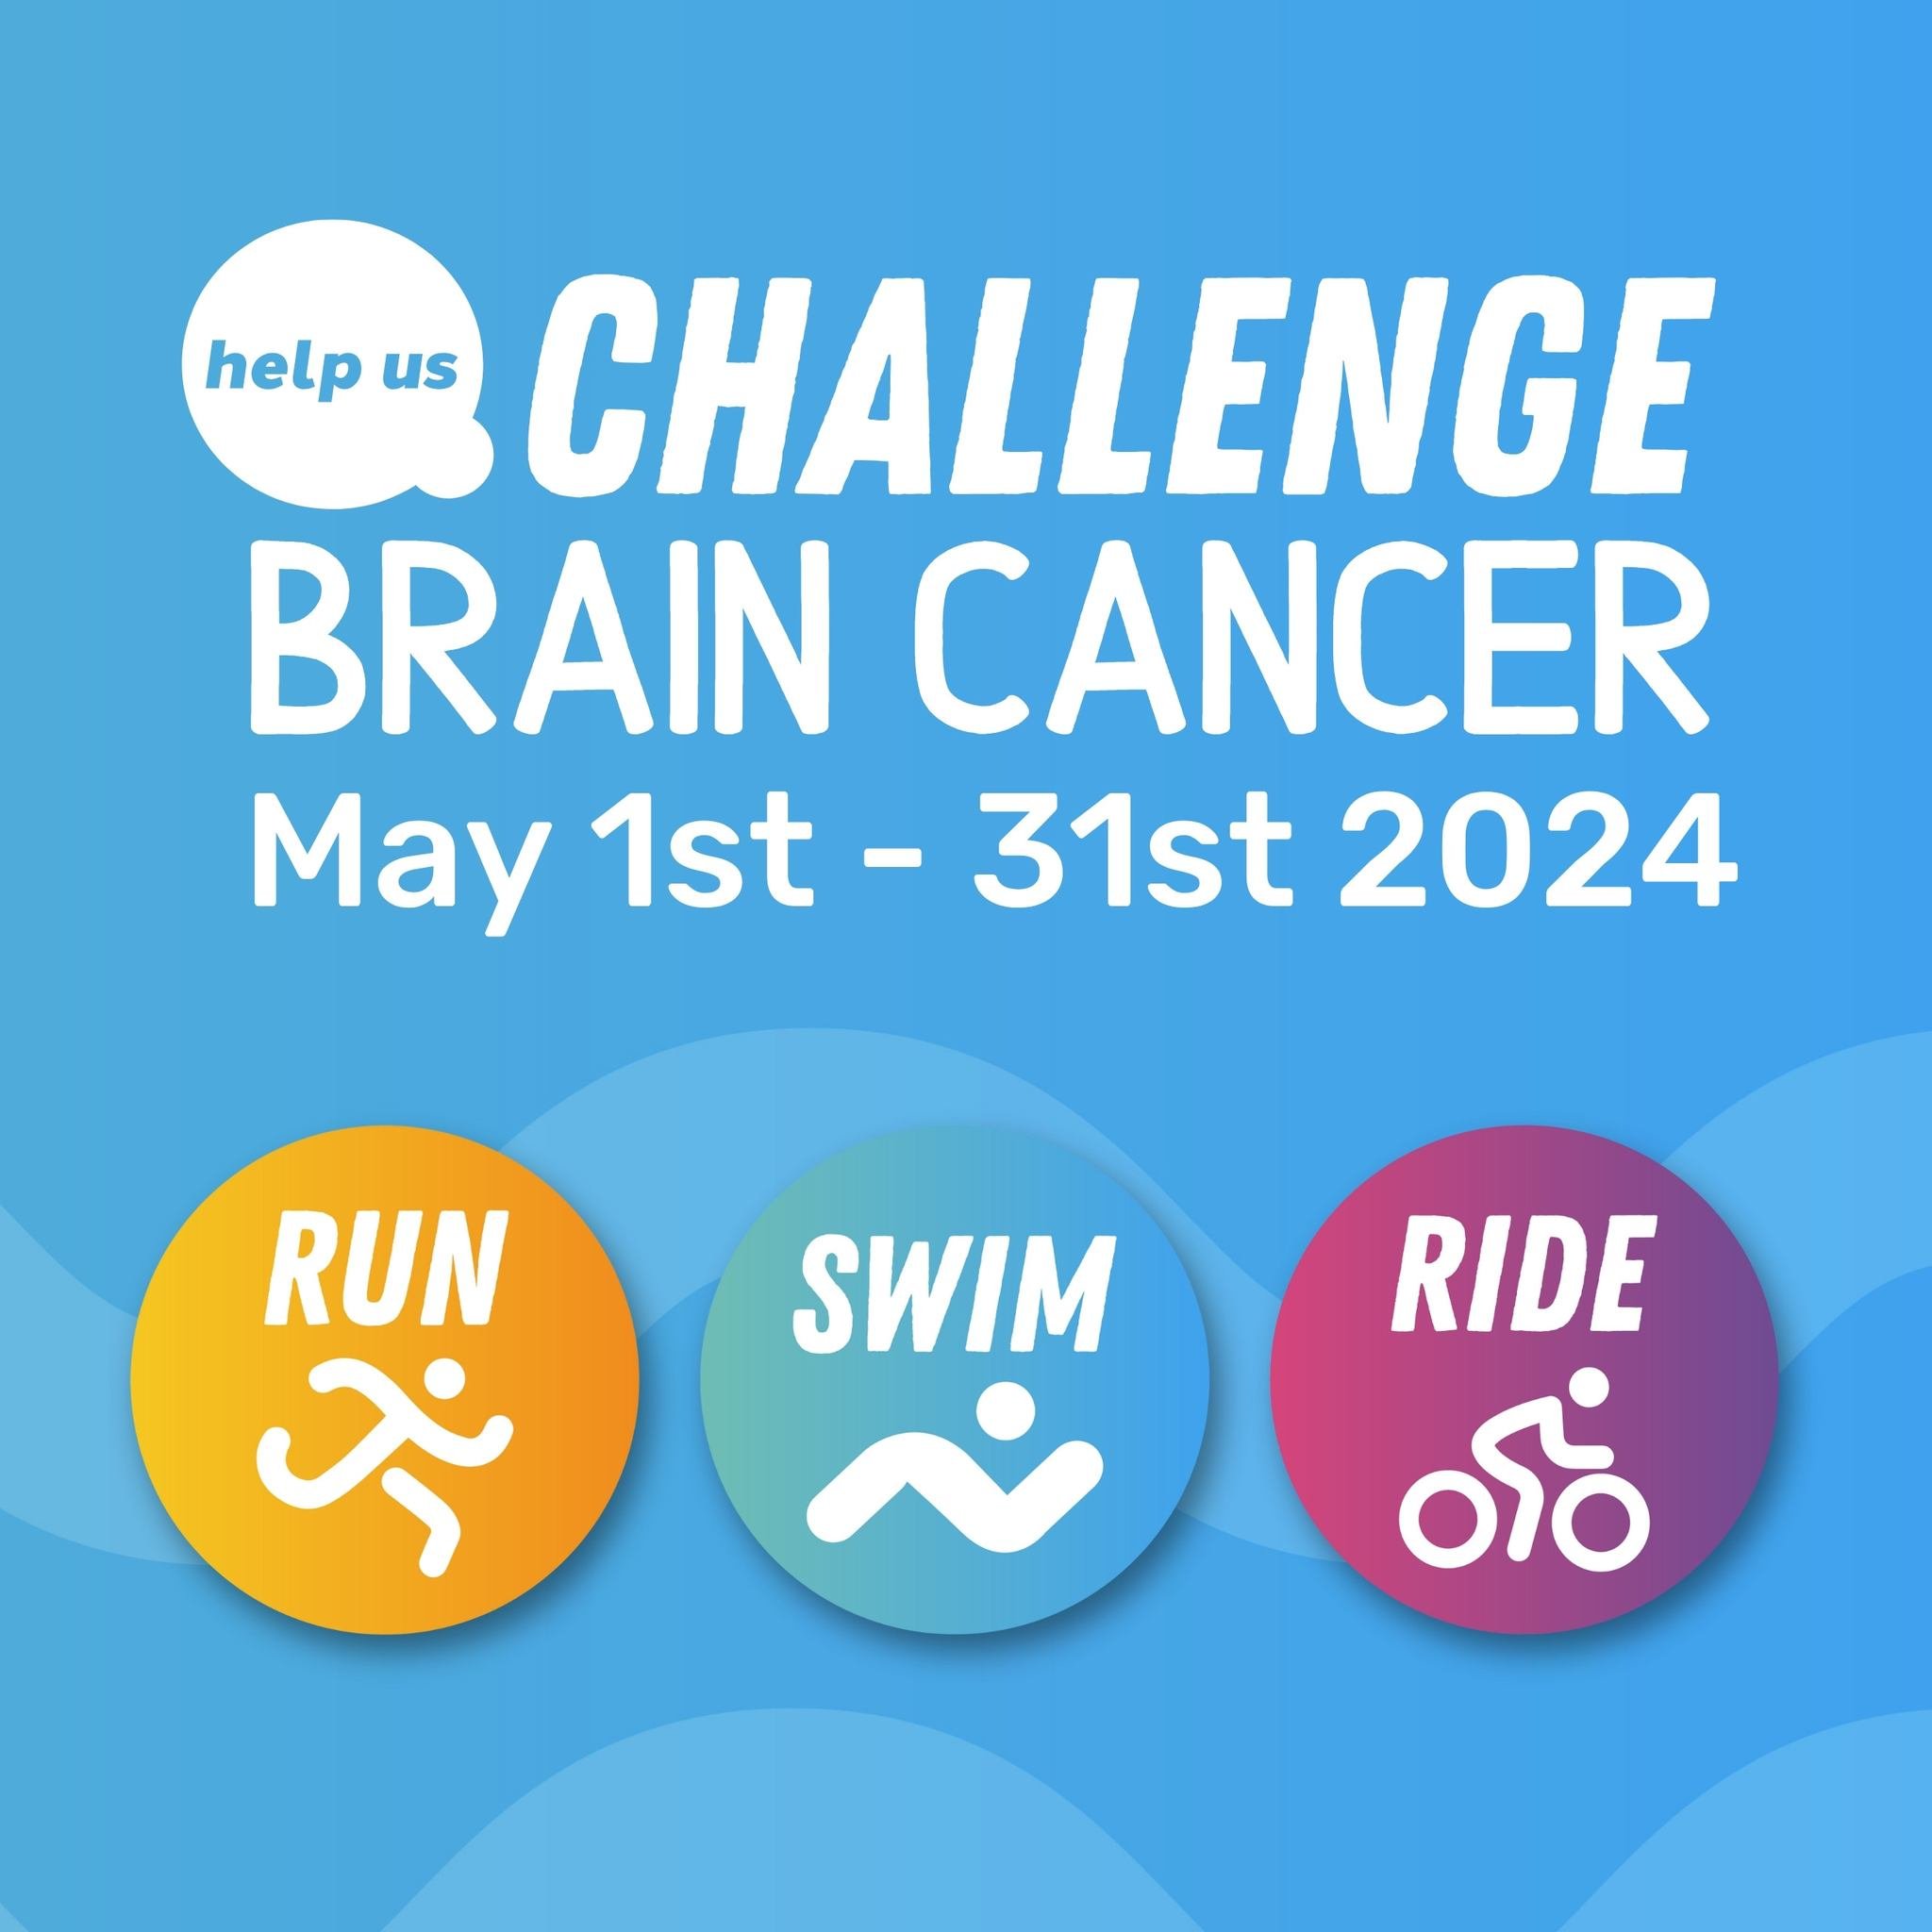 Lace up your shoes, grab your bike helmet, or jump into the pool because Challenge Brain Cancer is here, and we're calling on you to give it a tri! Sign up via the link in our bio x